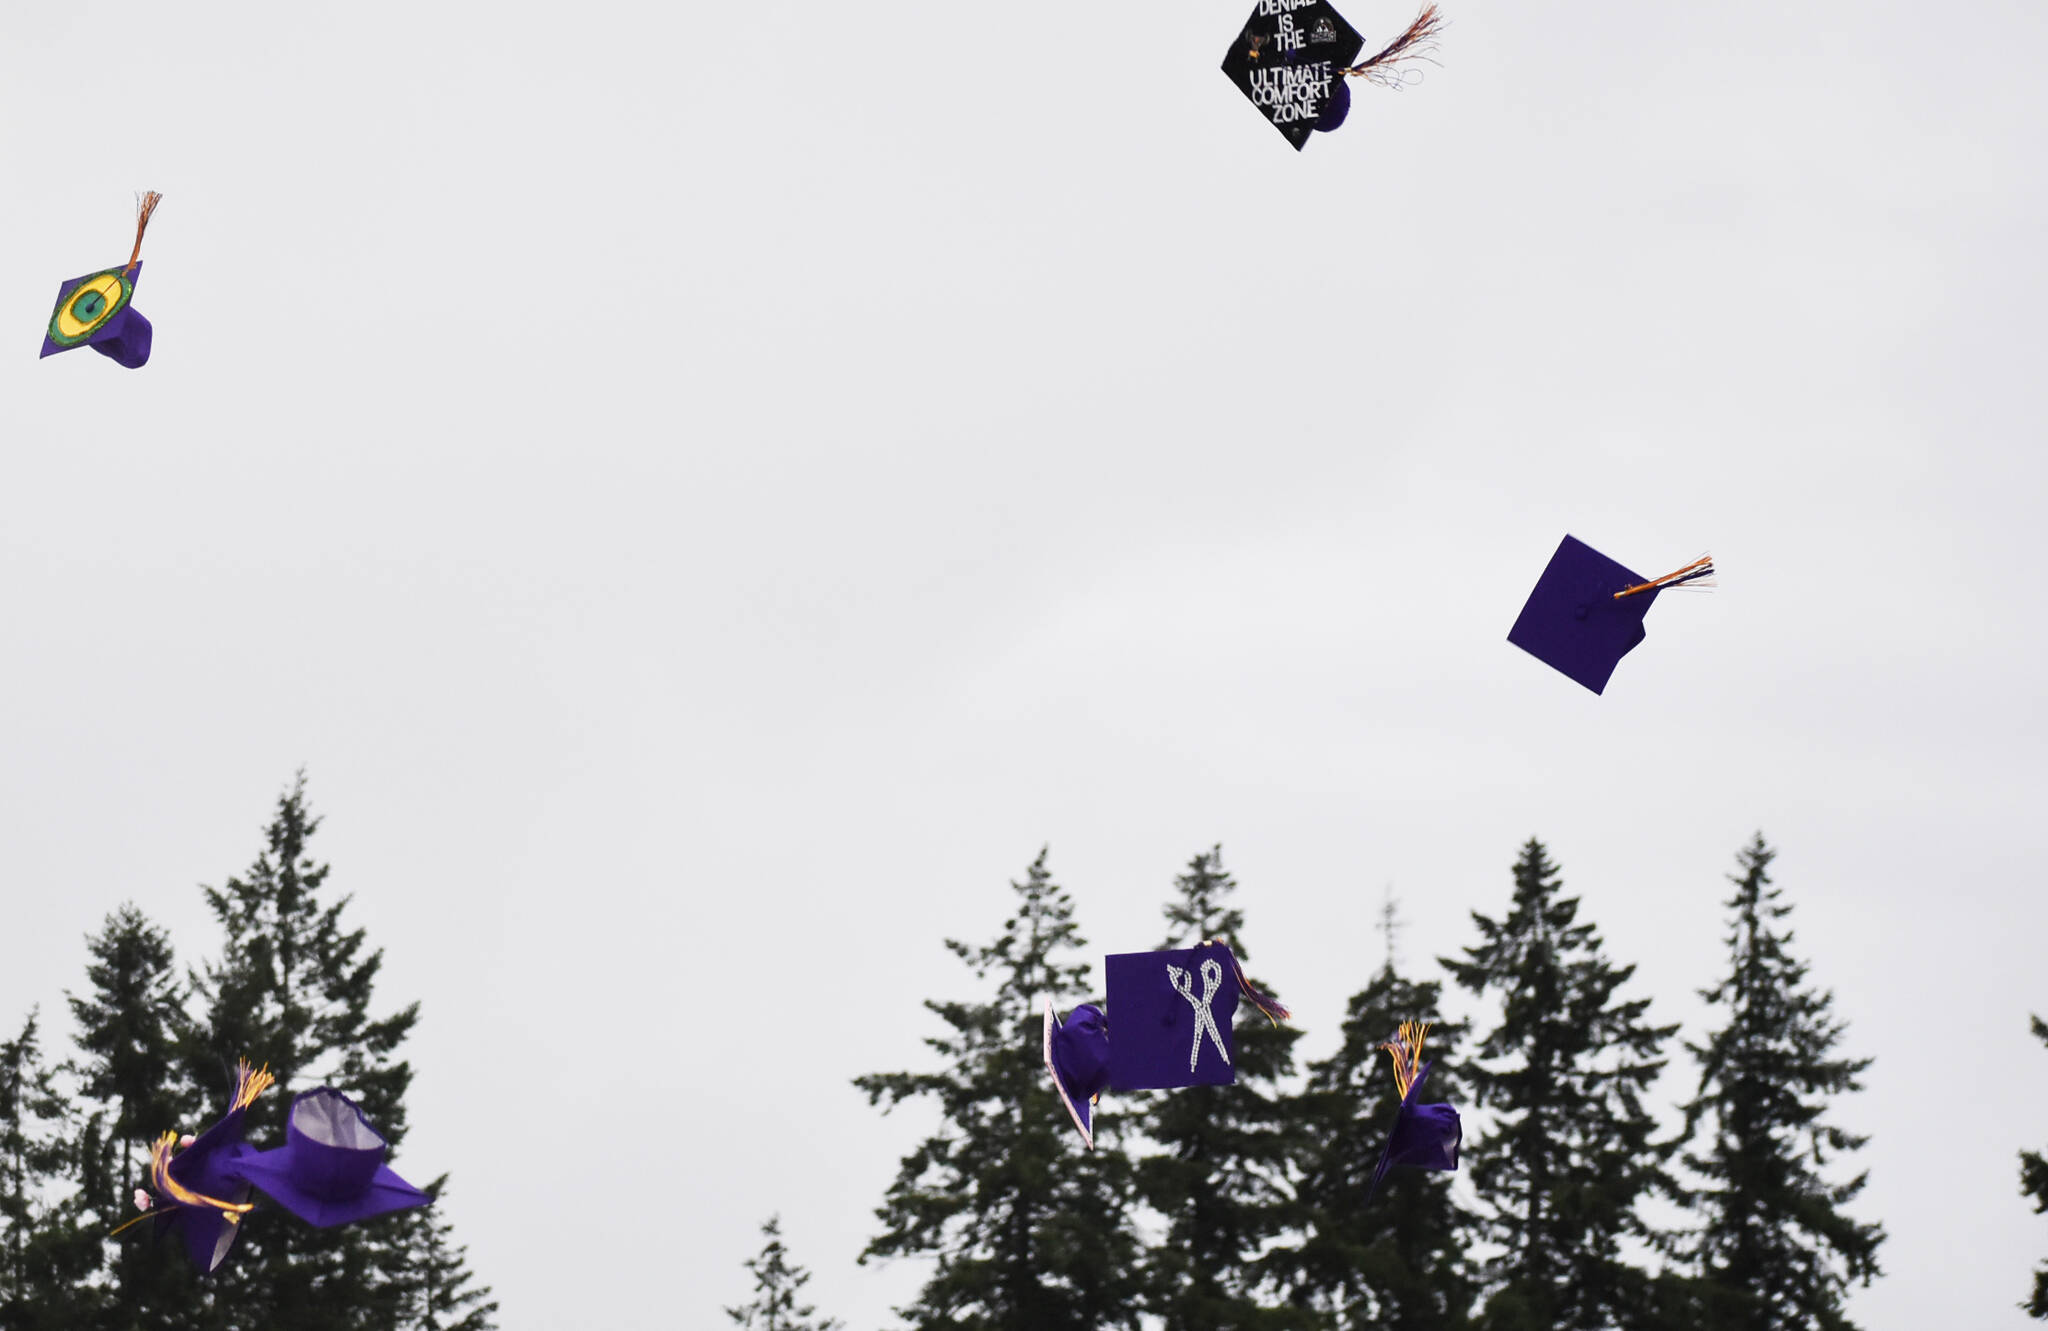 Caps were thrown in the air at the end of graduation.